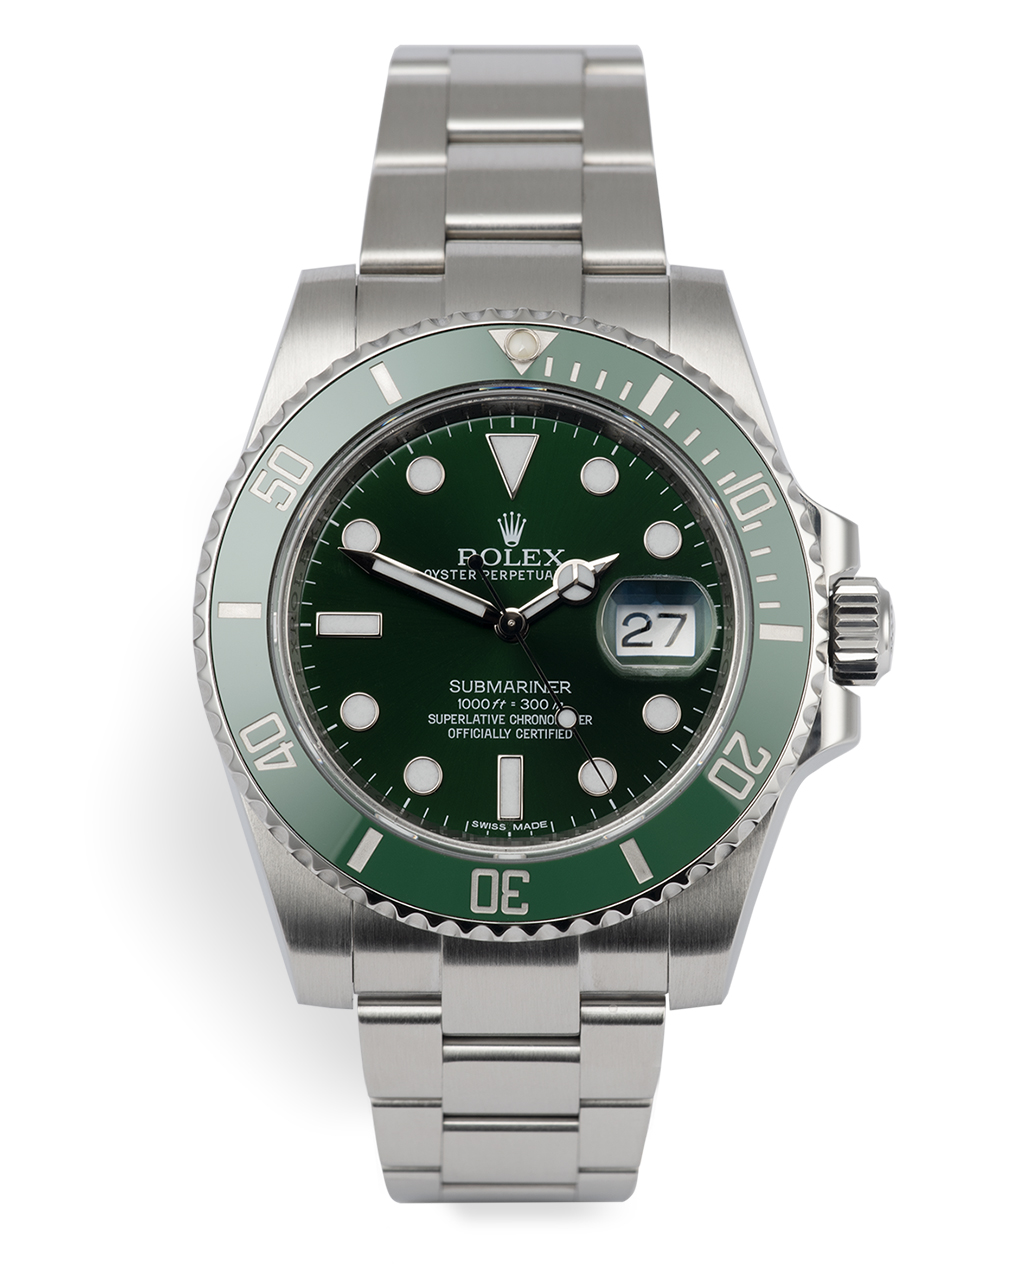 Rolex Submariner Date Watches ref 116610LV Discontinued The Watch